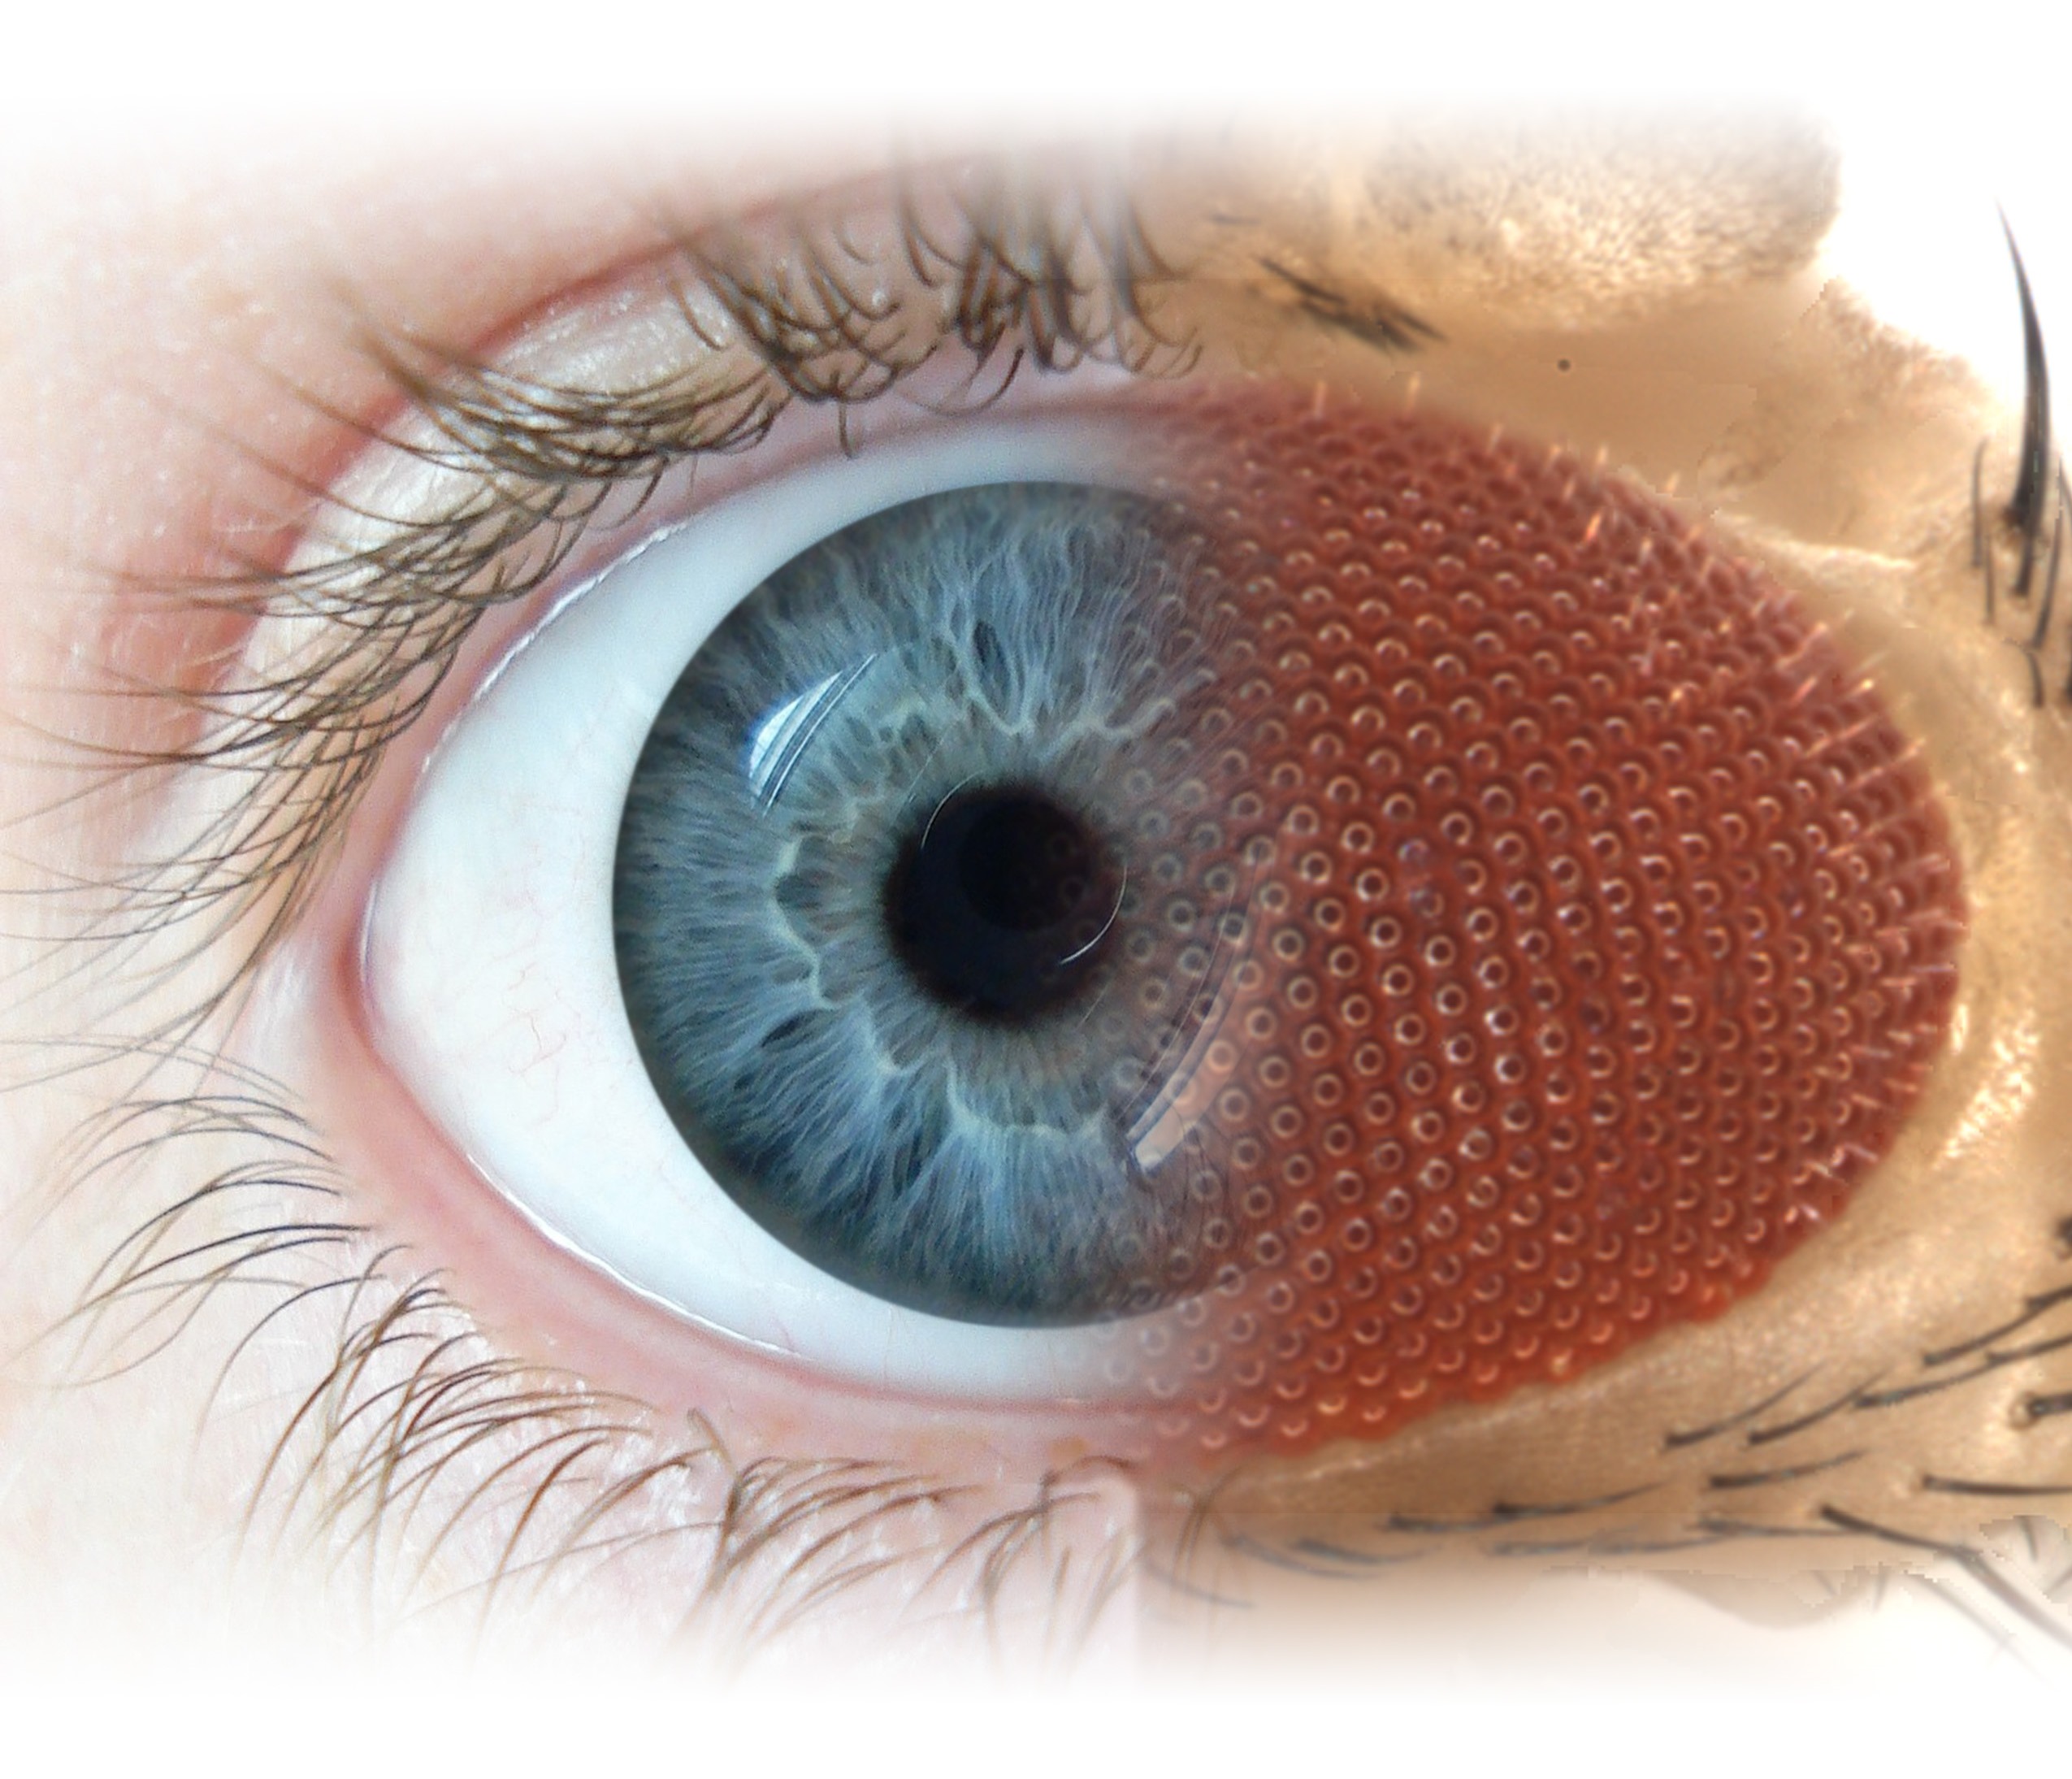 This illustration merging the human and fruit fly eye shows how the two organisms share many characteristics that can be exploited in the laboratory. 